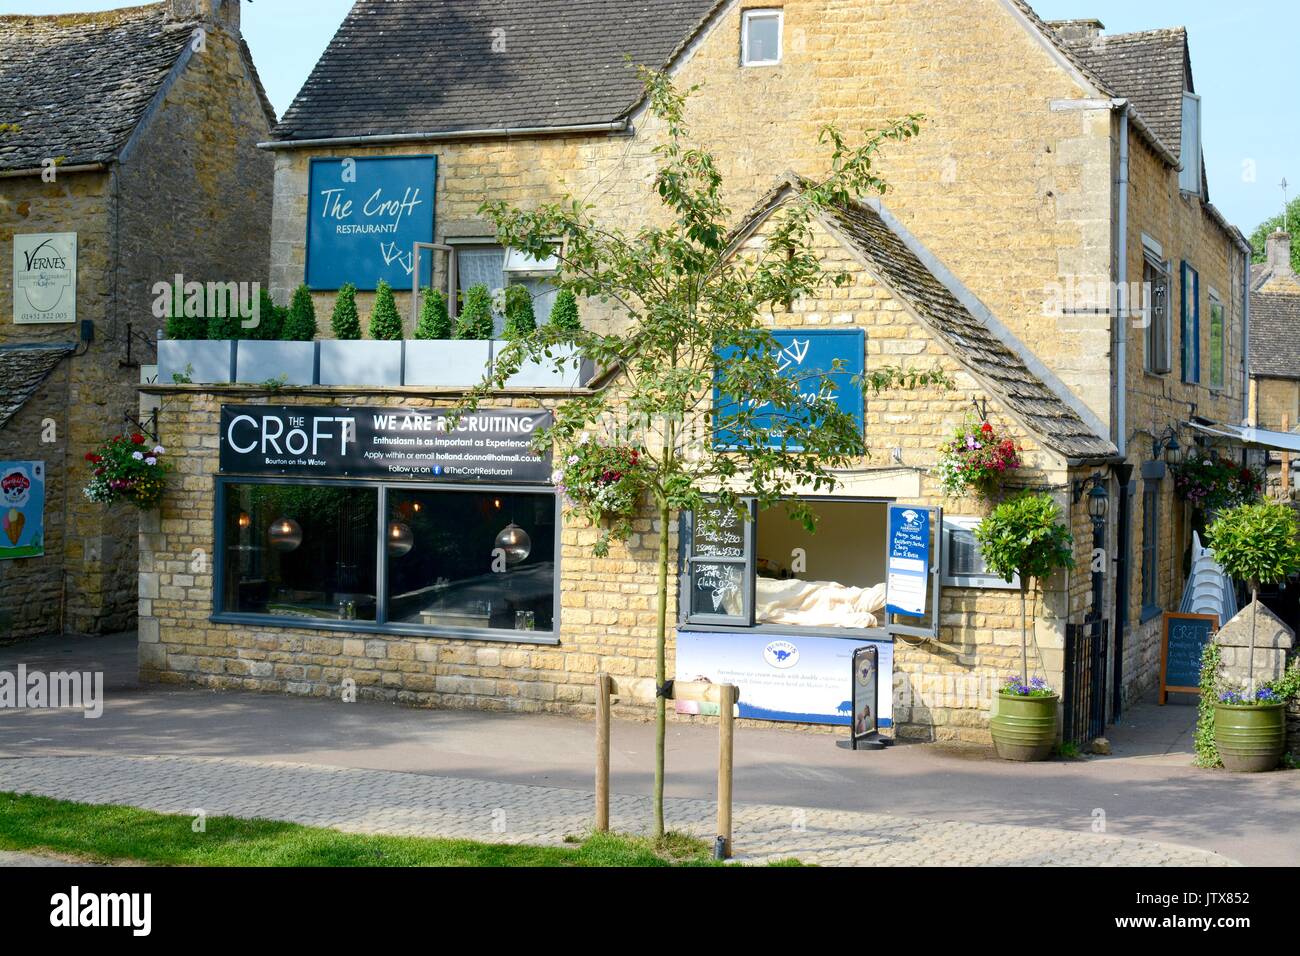 The Croft restaurant in the cotswold village of Bourton-on-the-Water, Gloucestershire,England, UK Stock Photo